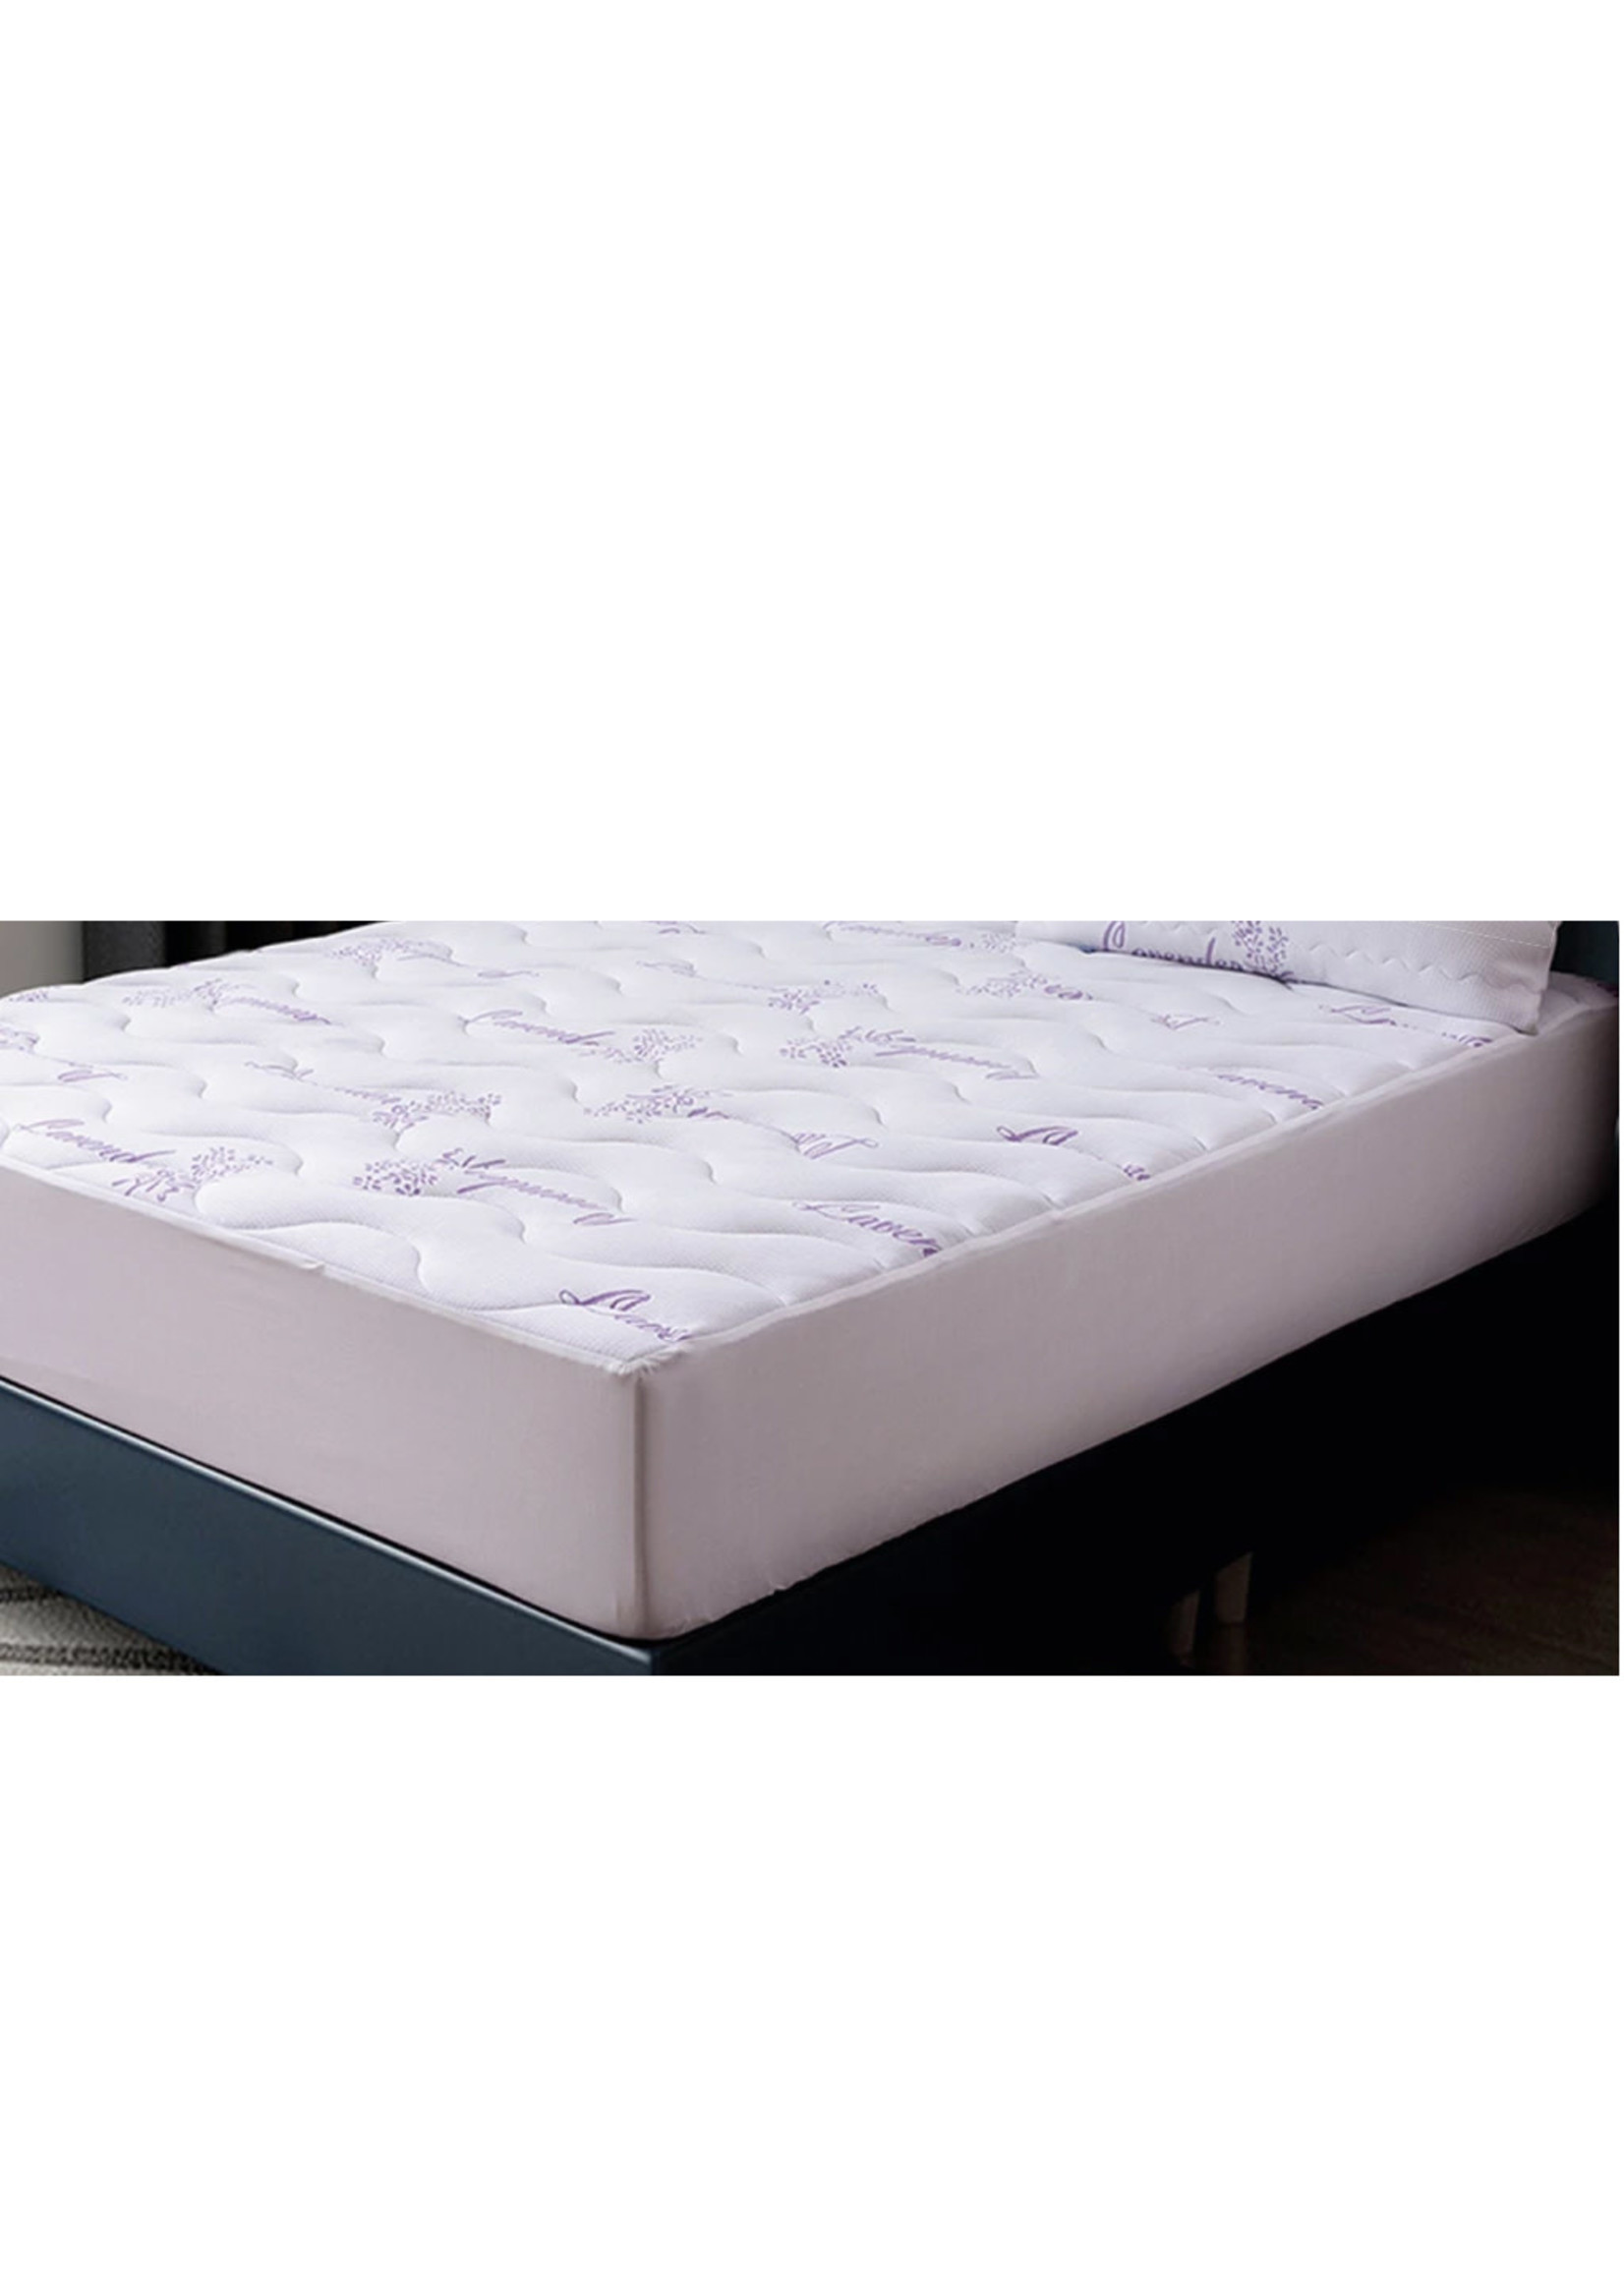 Lavender Scented Mattress Protector